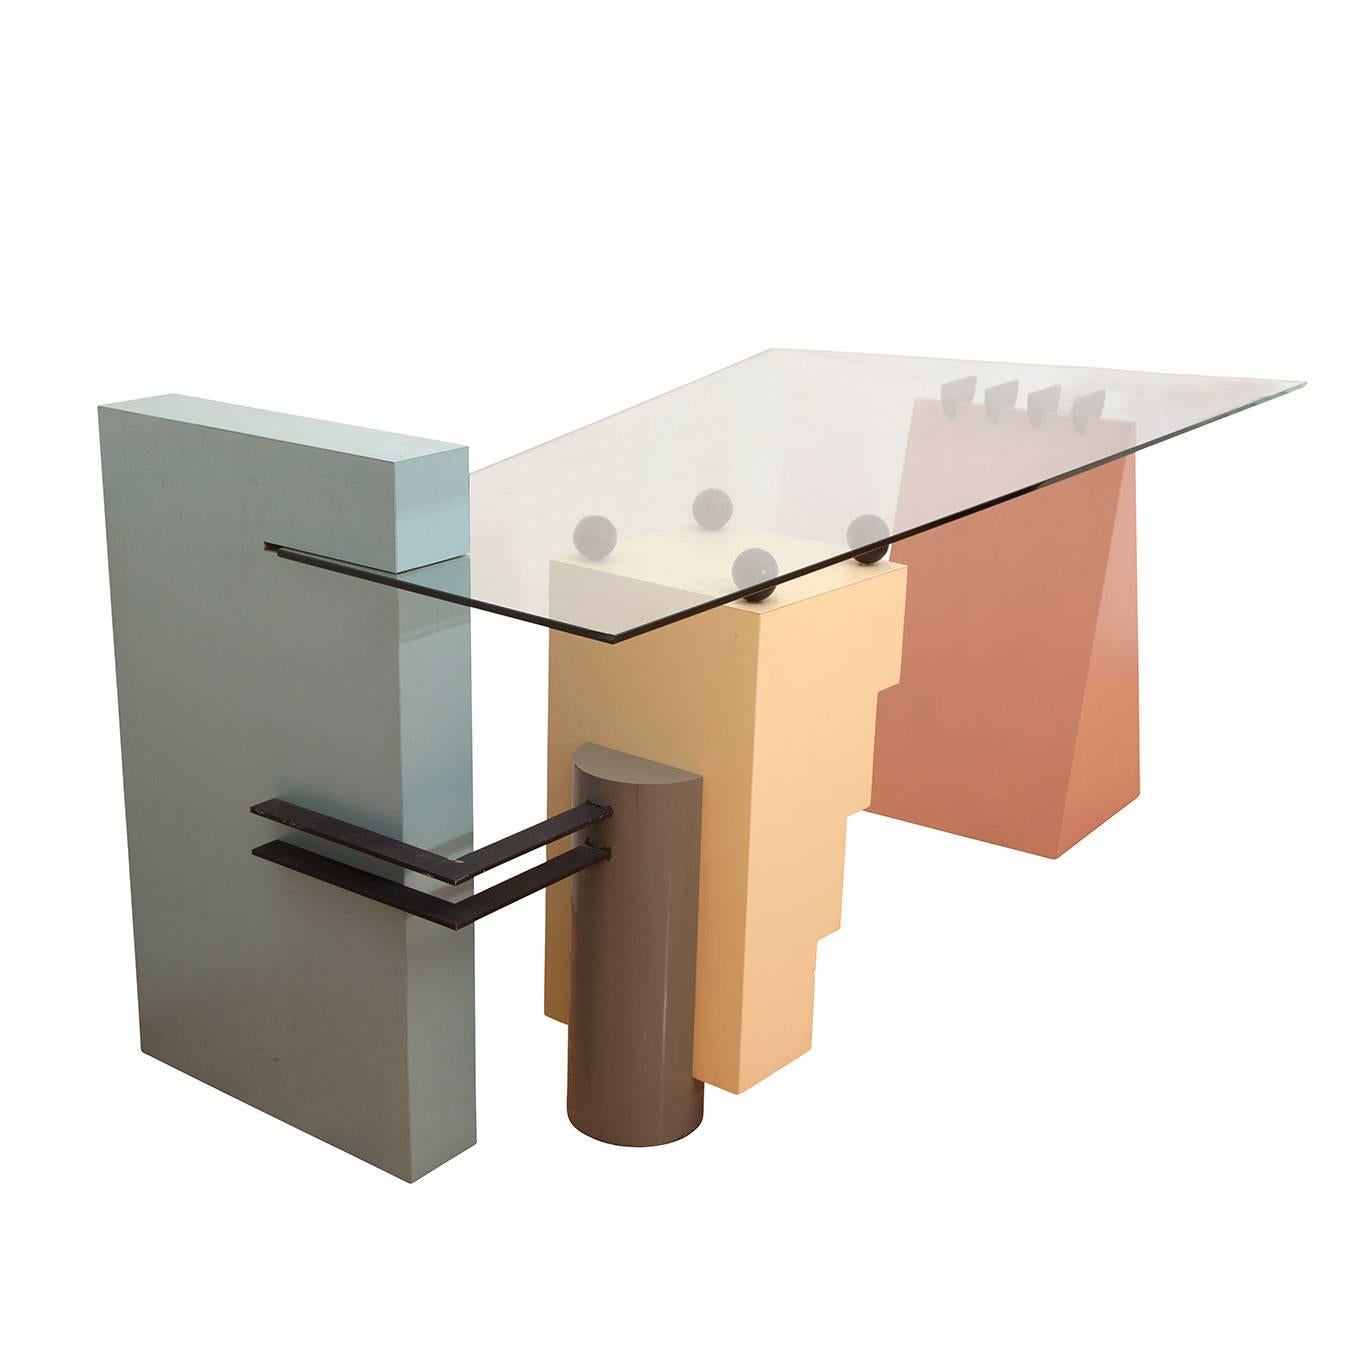 Memphis Milano Style Desk

Height of glass: 28.5''

Maximum height of piece: 33.25''